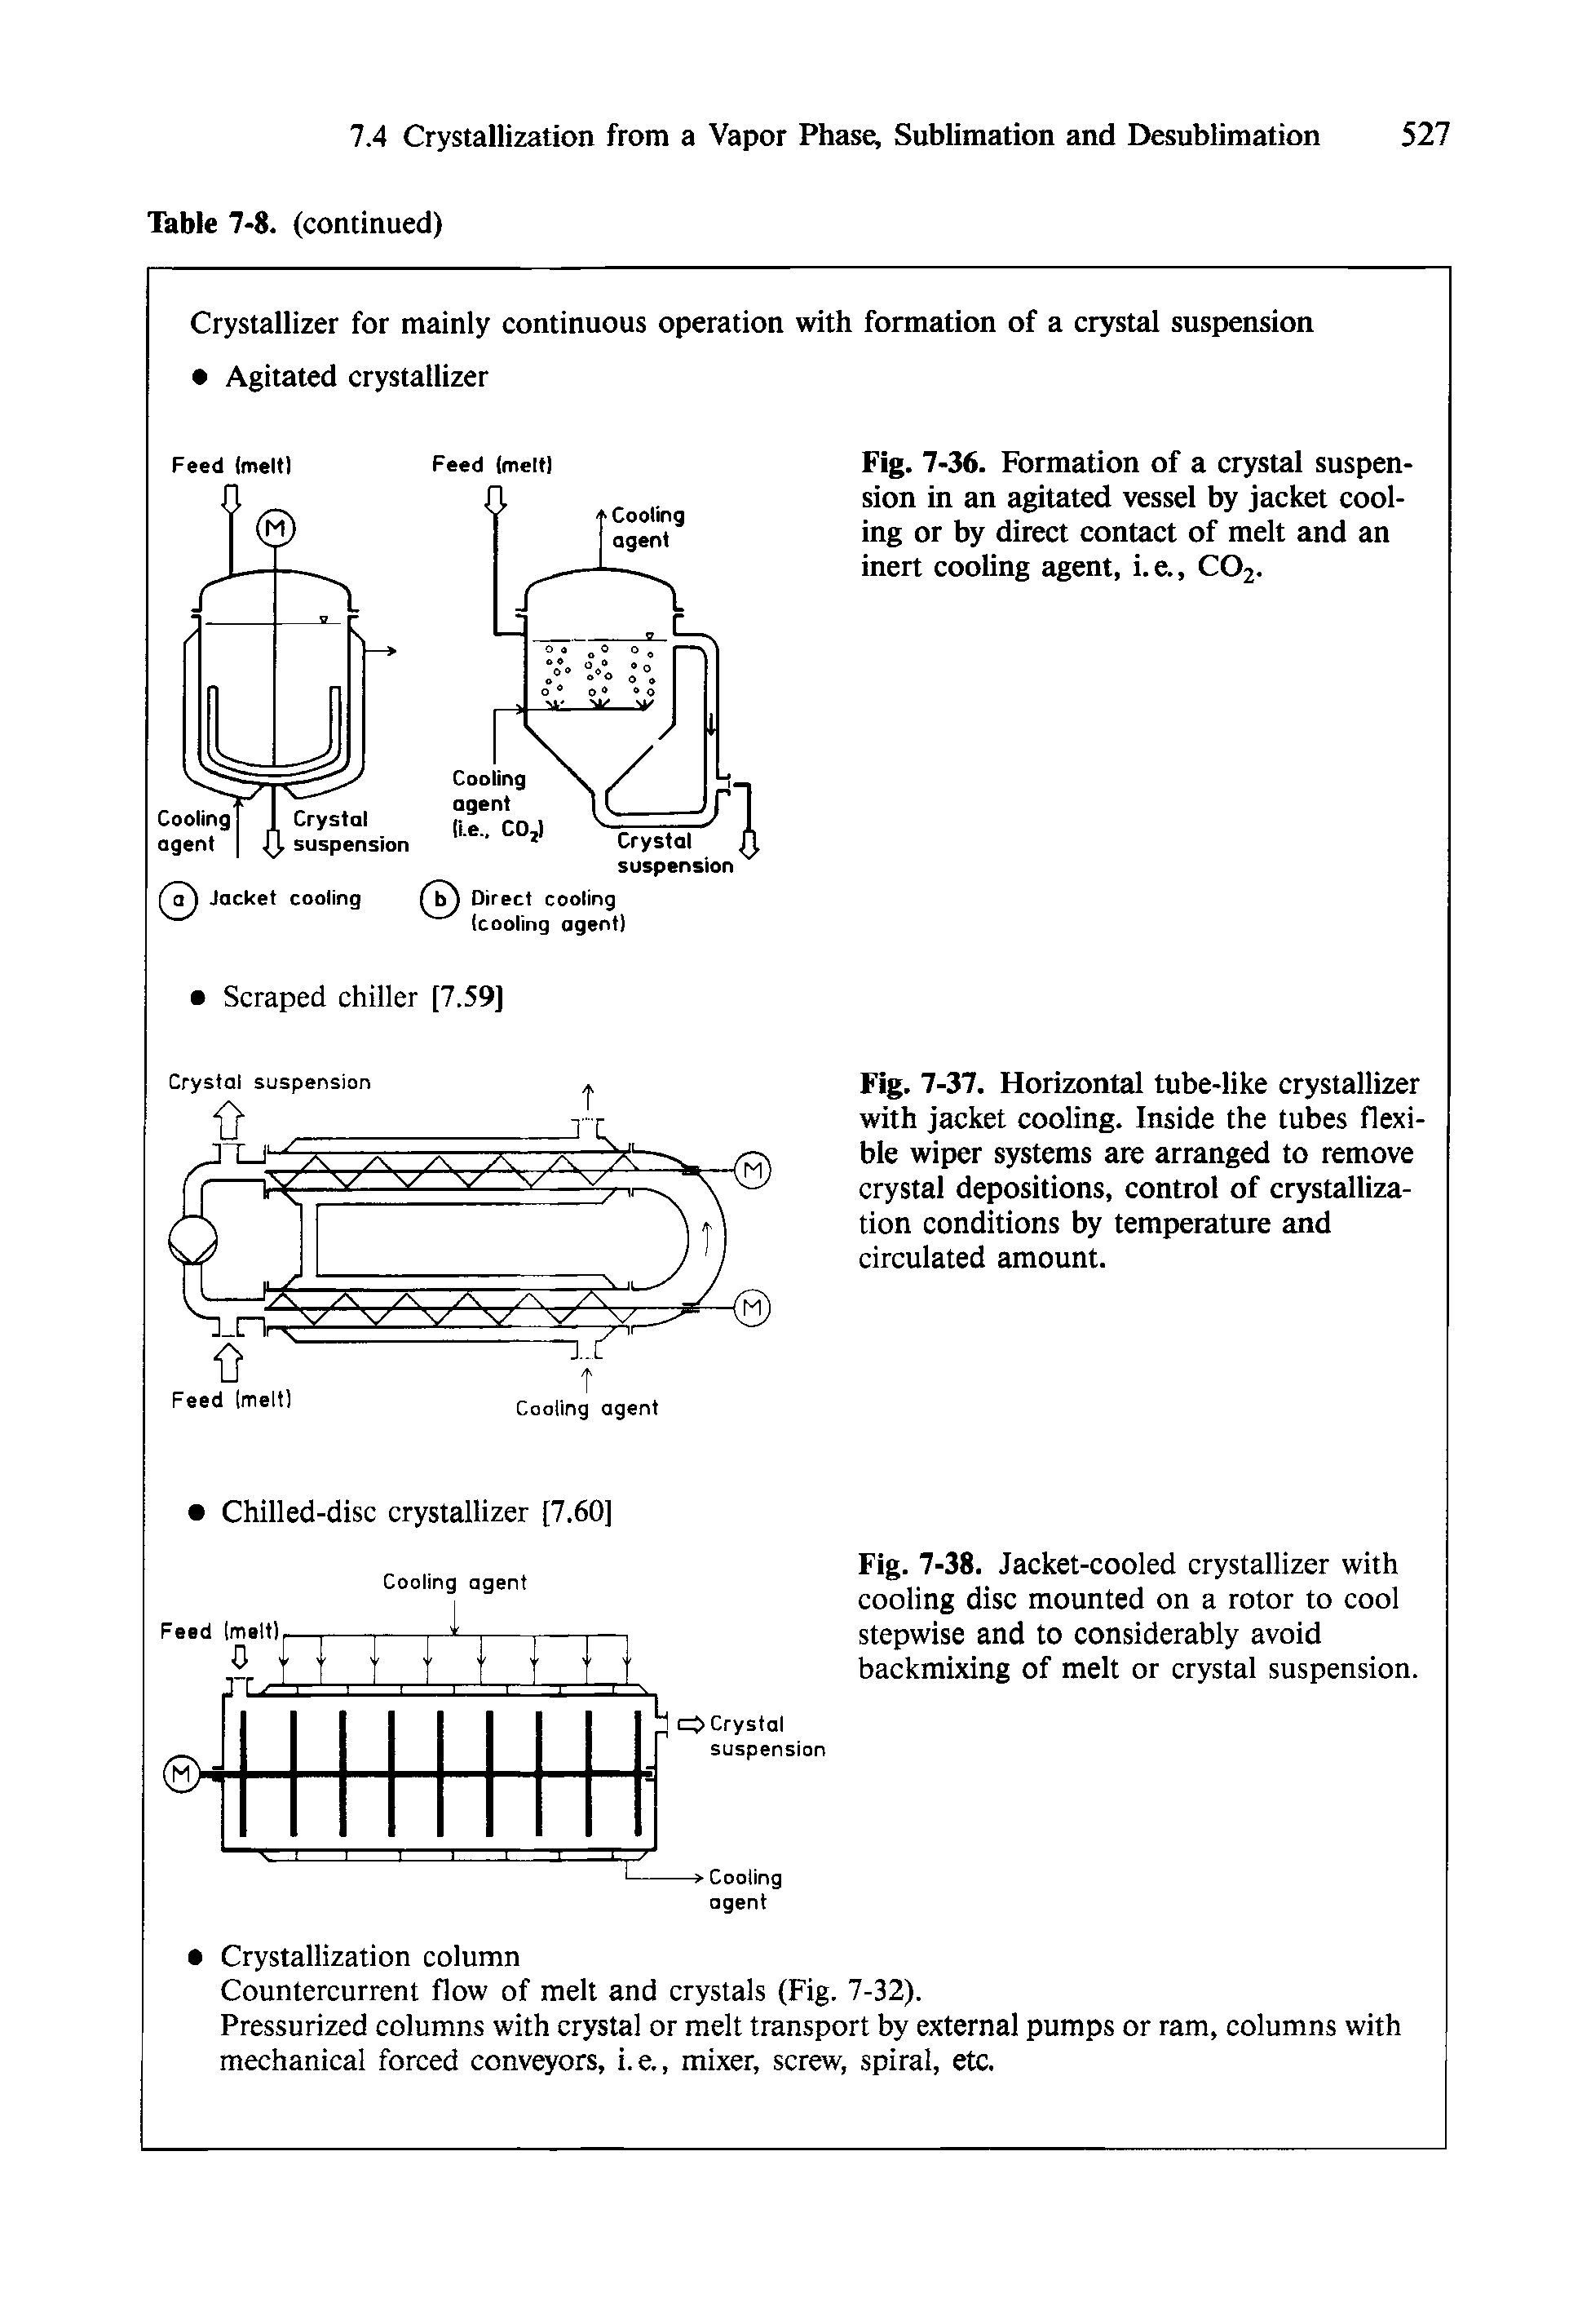 Fig. 7-38. Jacket-cooled crystallizer with cooling disc mounted on a rotor to cool stepwise and to considerably avoid backmixing of melt or crystal suspension.